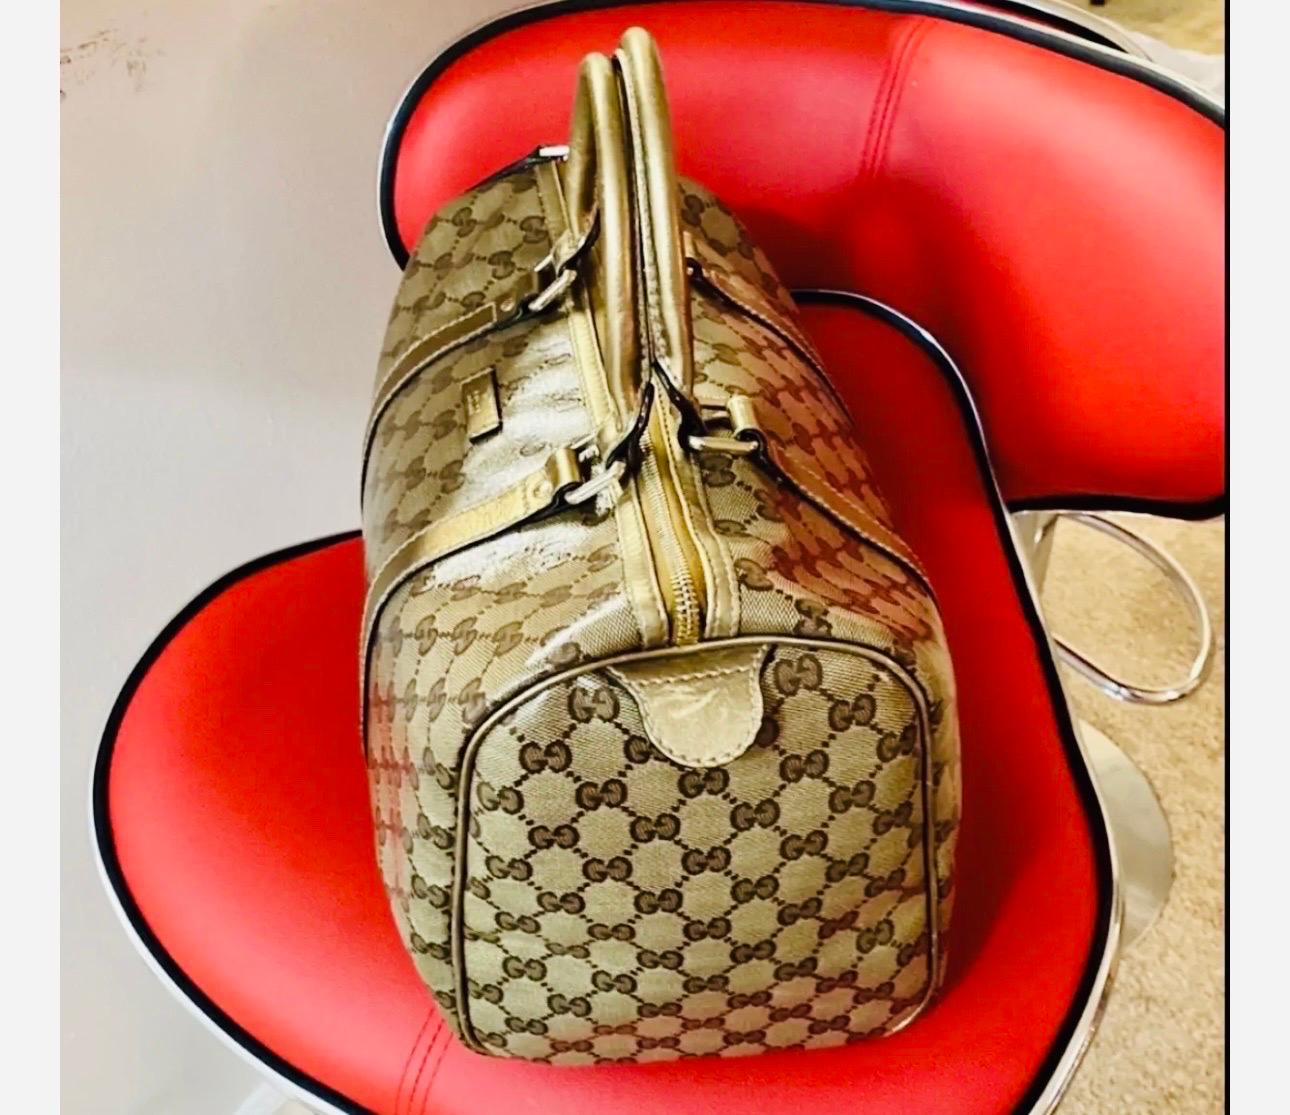 Gucci Joy Boston Bag GG Imprime Medium in Excellent condition like New
Type: Top Handle, Tote
Color: Brown with Golden/ Bronze stripes
Material: GG Monogram coated canvas
Includes: Gucci dust bag
Designer Haven ID: 19360B
Details: 
Measurements: